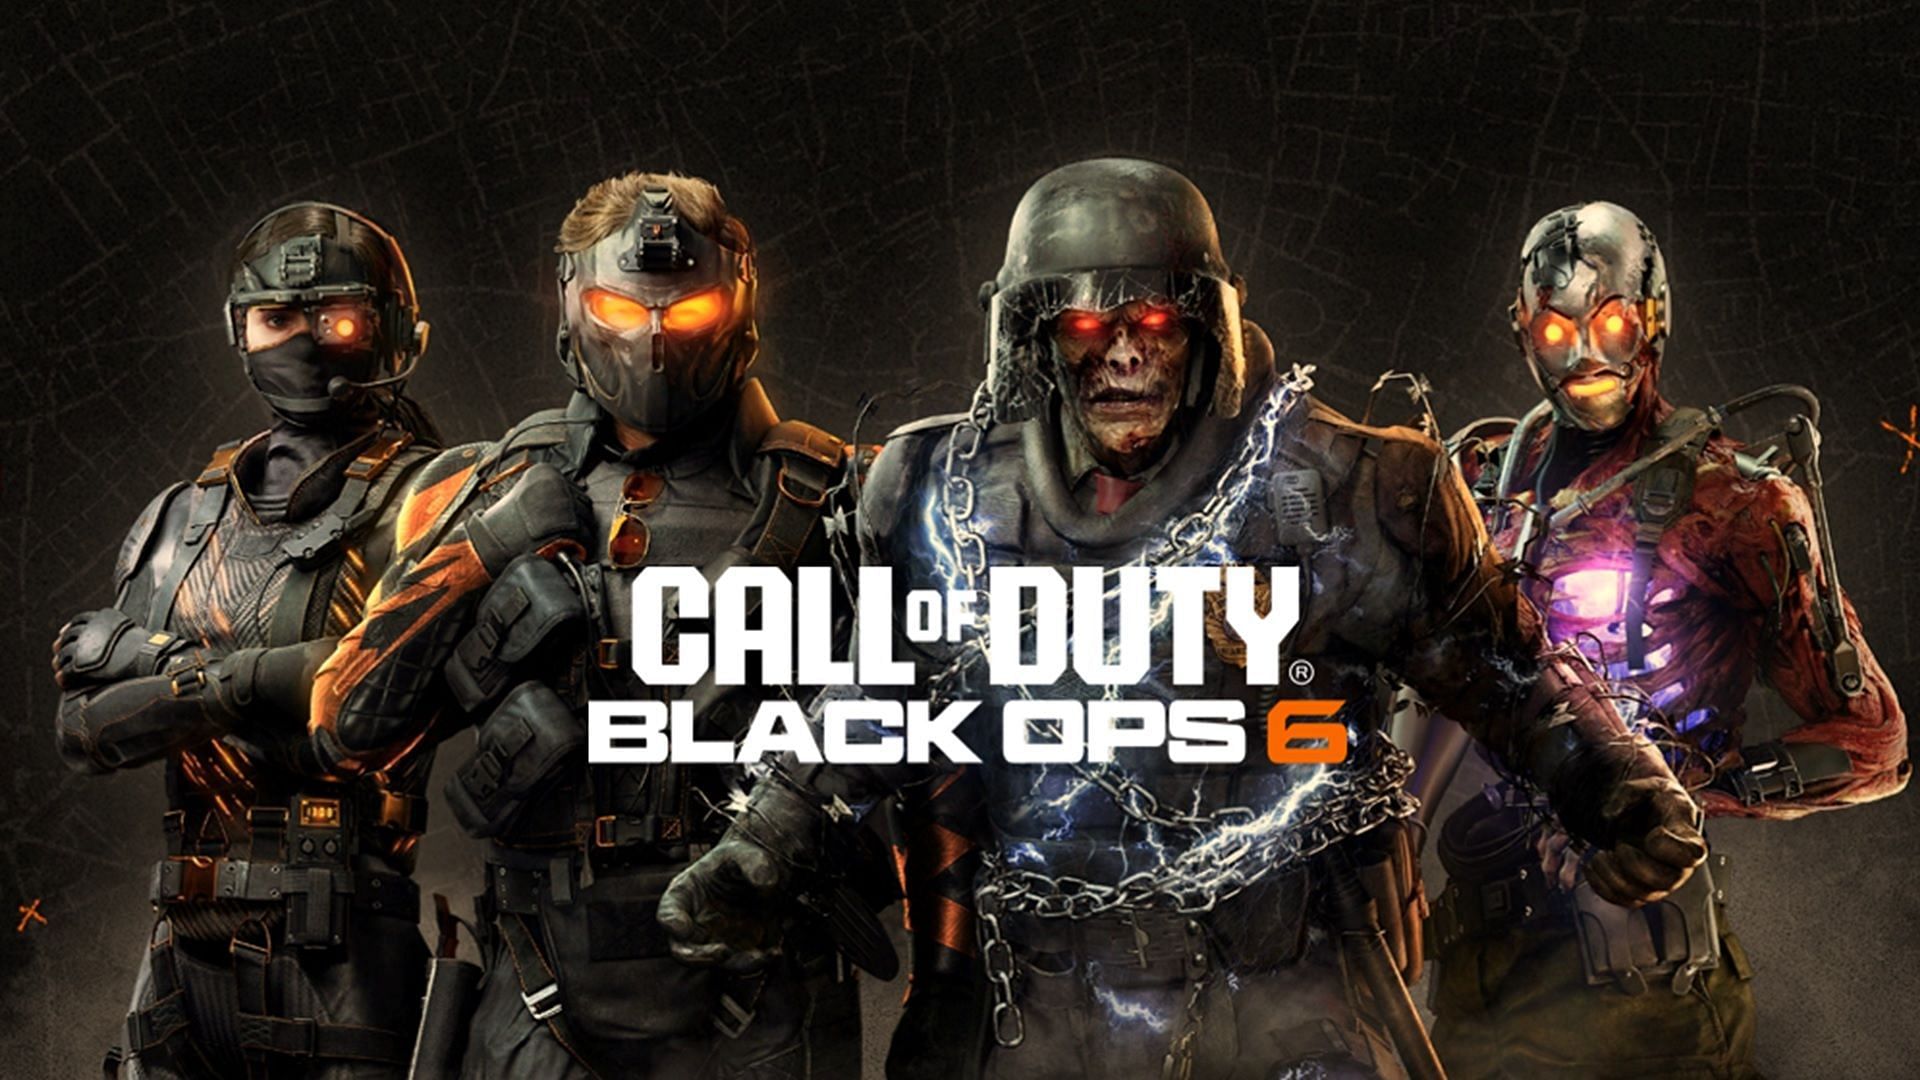 Along with Treyarch, there are many other Call of Duty studios involved in the development of Black Ops 6